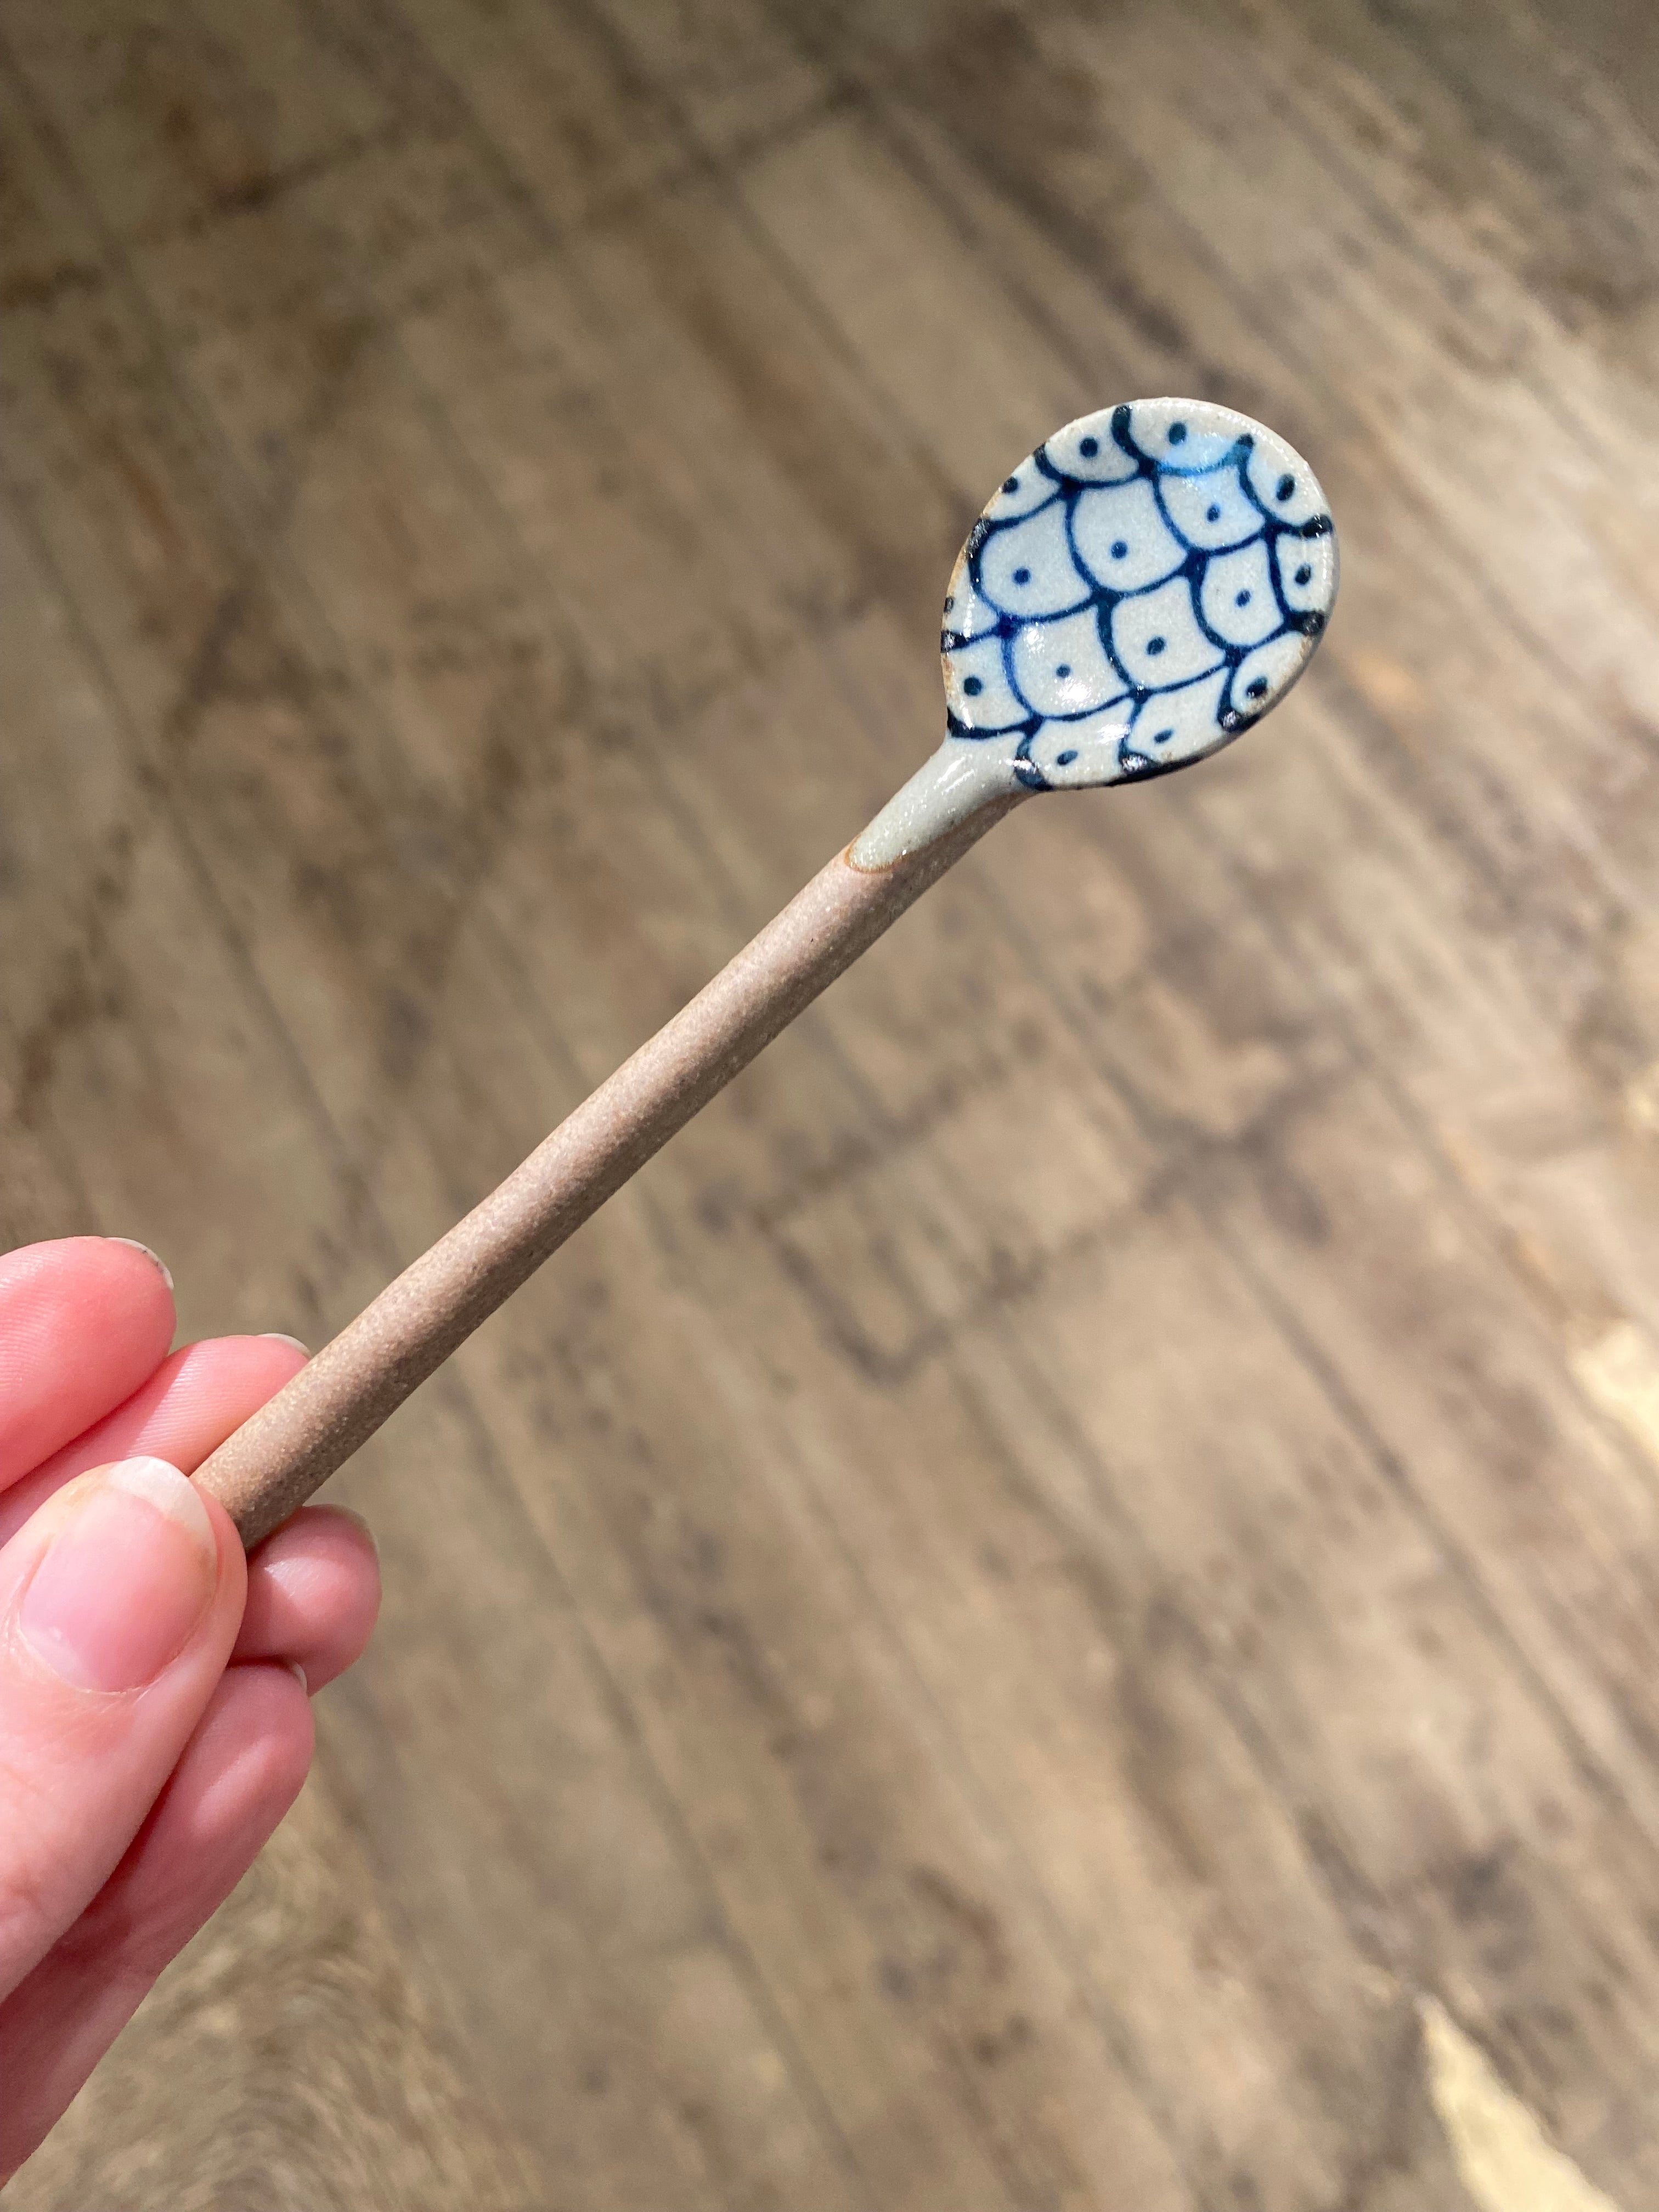 Ceramic spoon with motif of blue fish scales